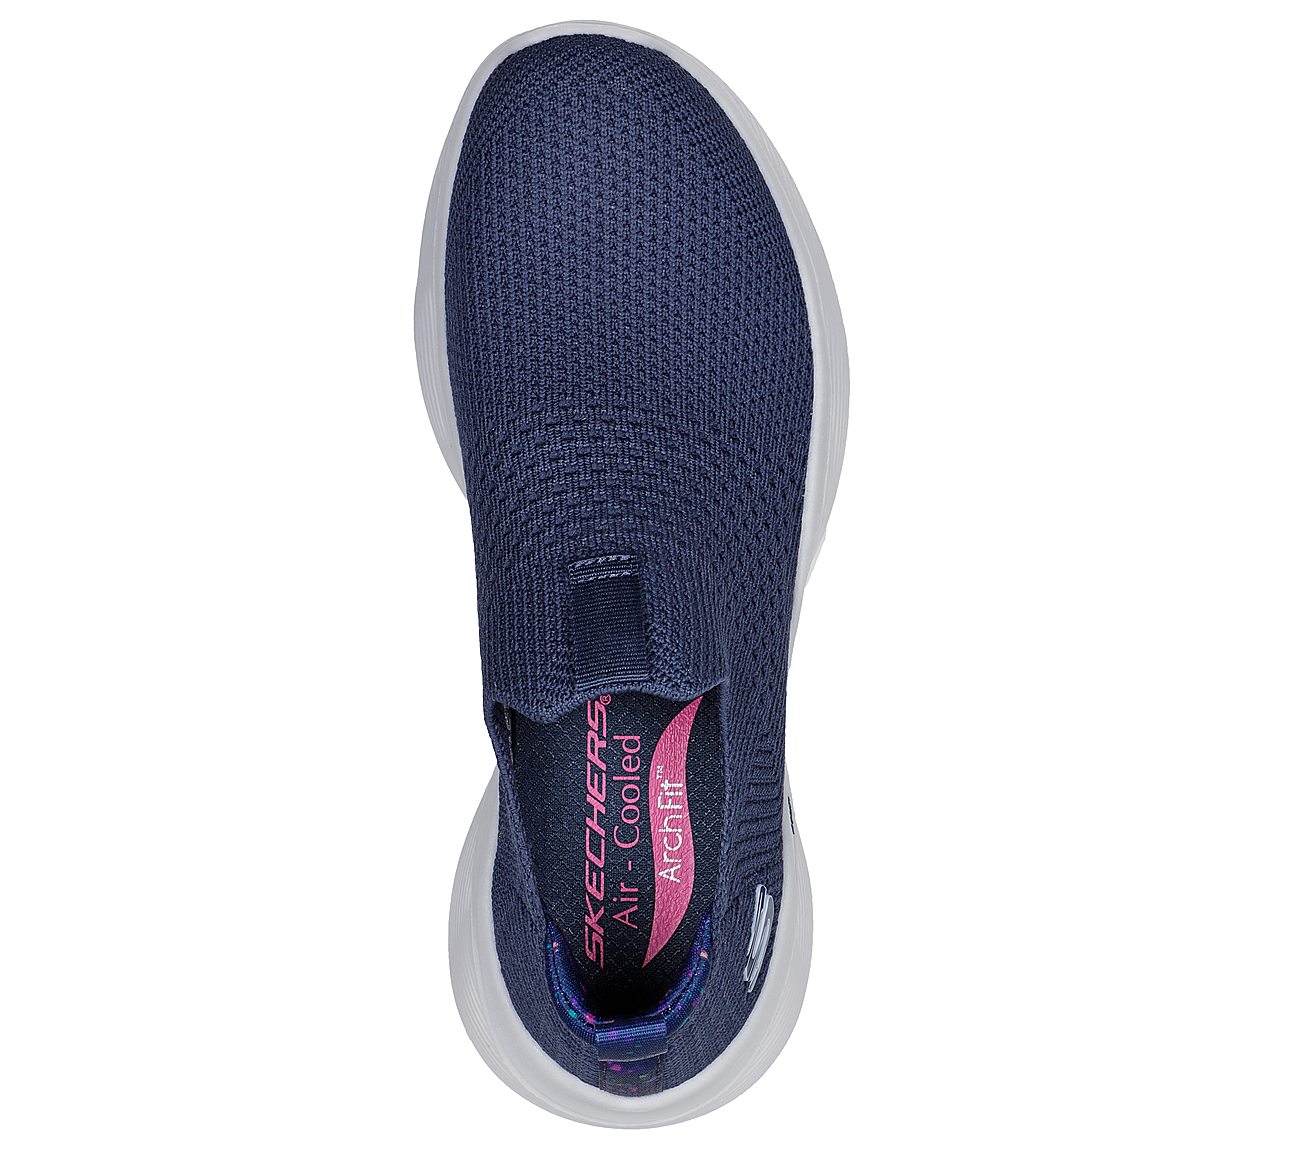 ARCH FIT INFINITY, NAVY/LAVENDER Footwear Top View